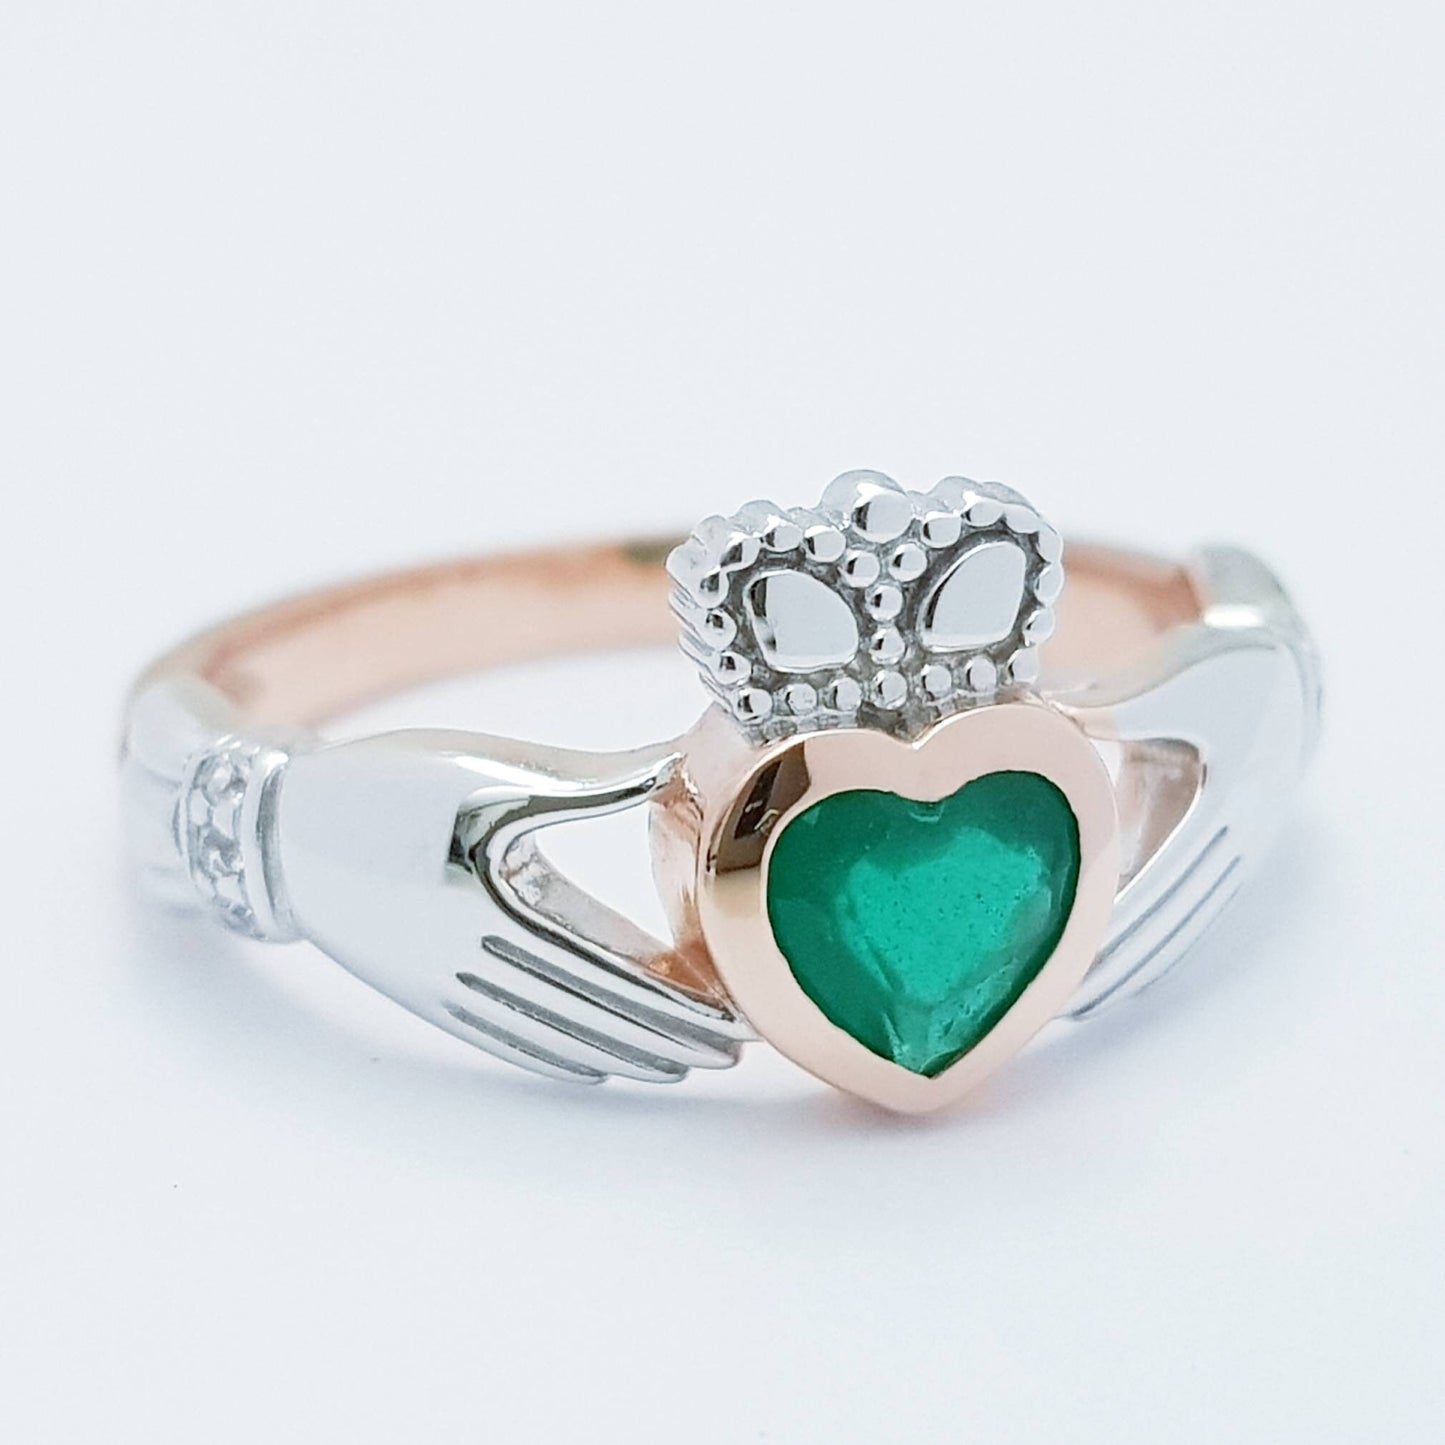 Sterling Silver Rose Gold plated Claddagh ring set with emerald green stone, heart and hands ring